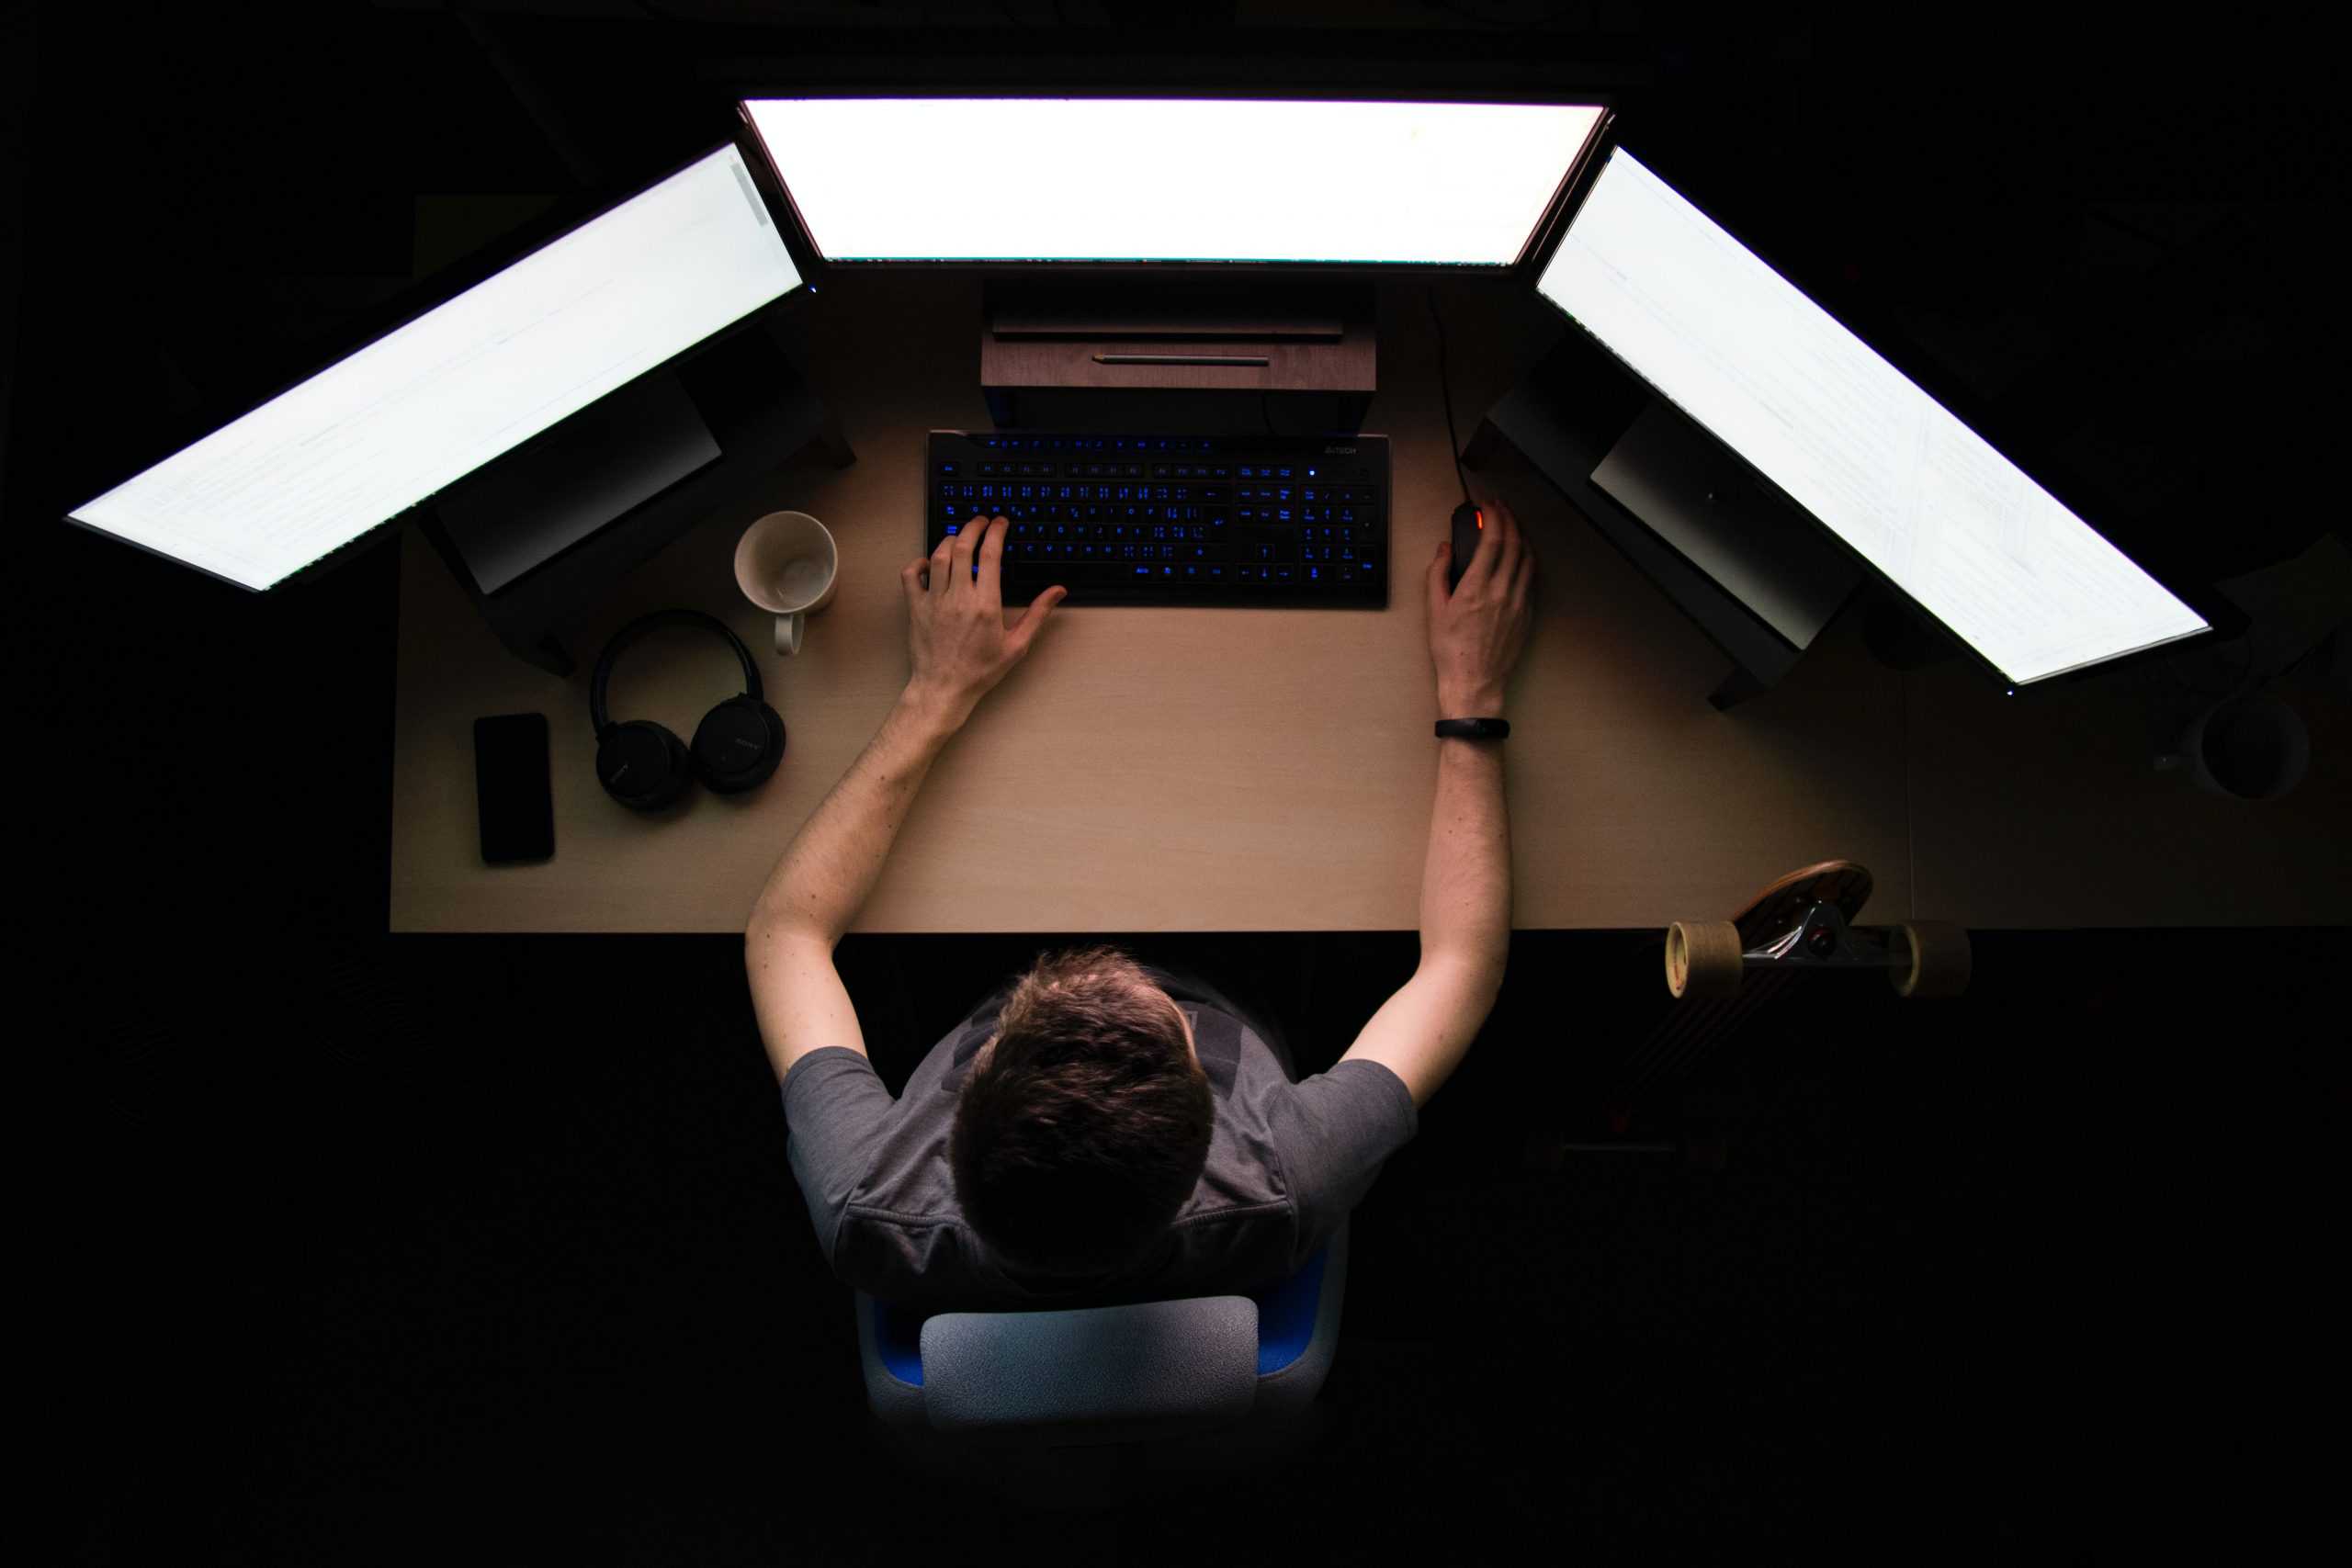 Birds eye view of a person using a on computer in a dark room